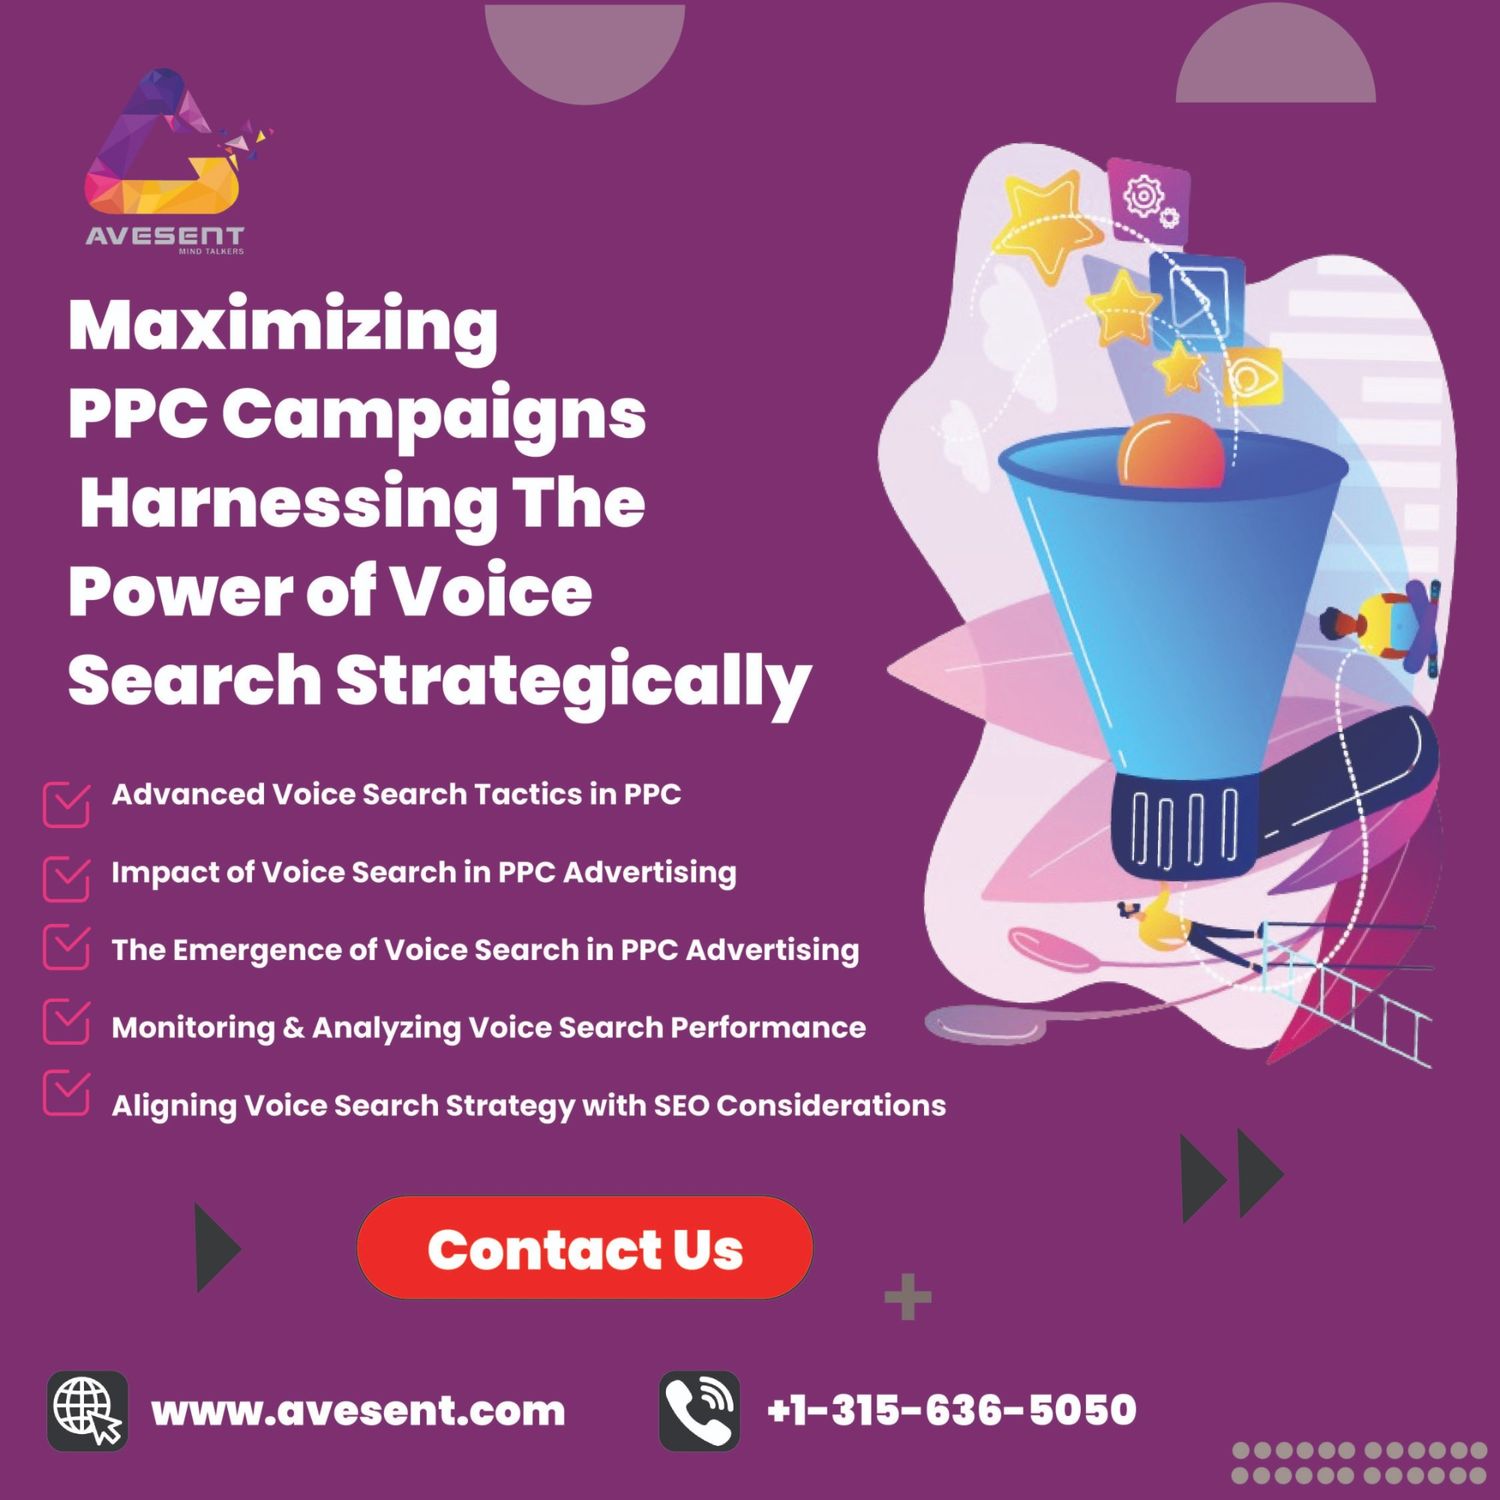 You are currently viewing Strategic Use of Voice Search in PPC Advertising Campaigns